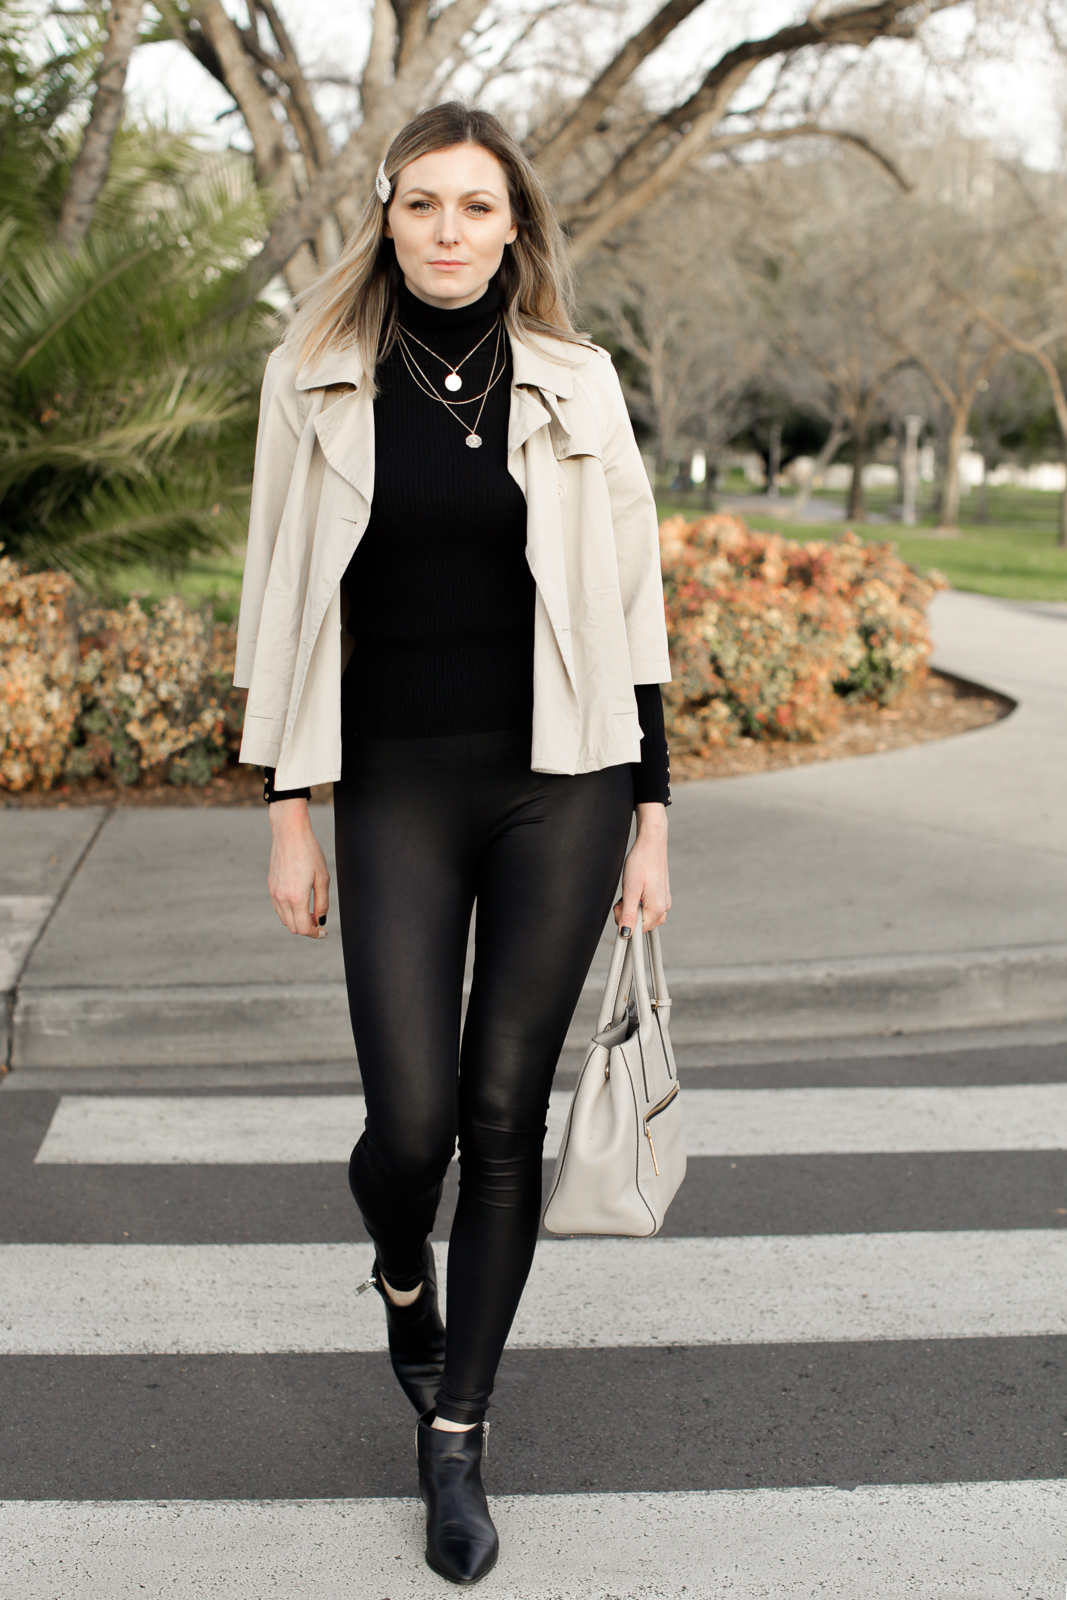 How to wear faux leather leggings, fashion tips featured by top US fashion blog, Tea Cups & Tulips